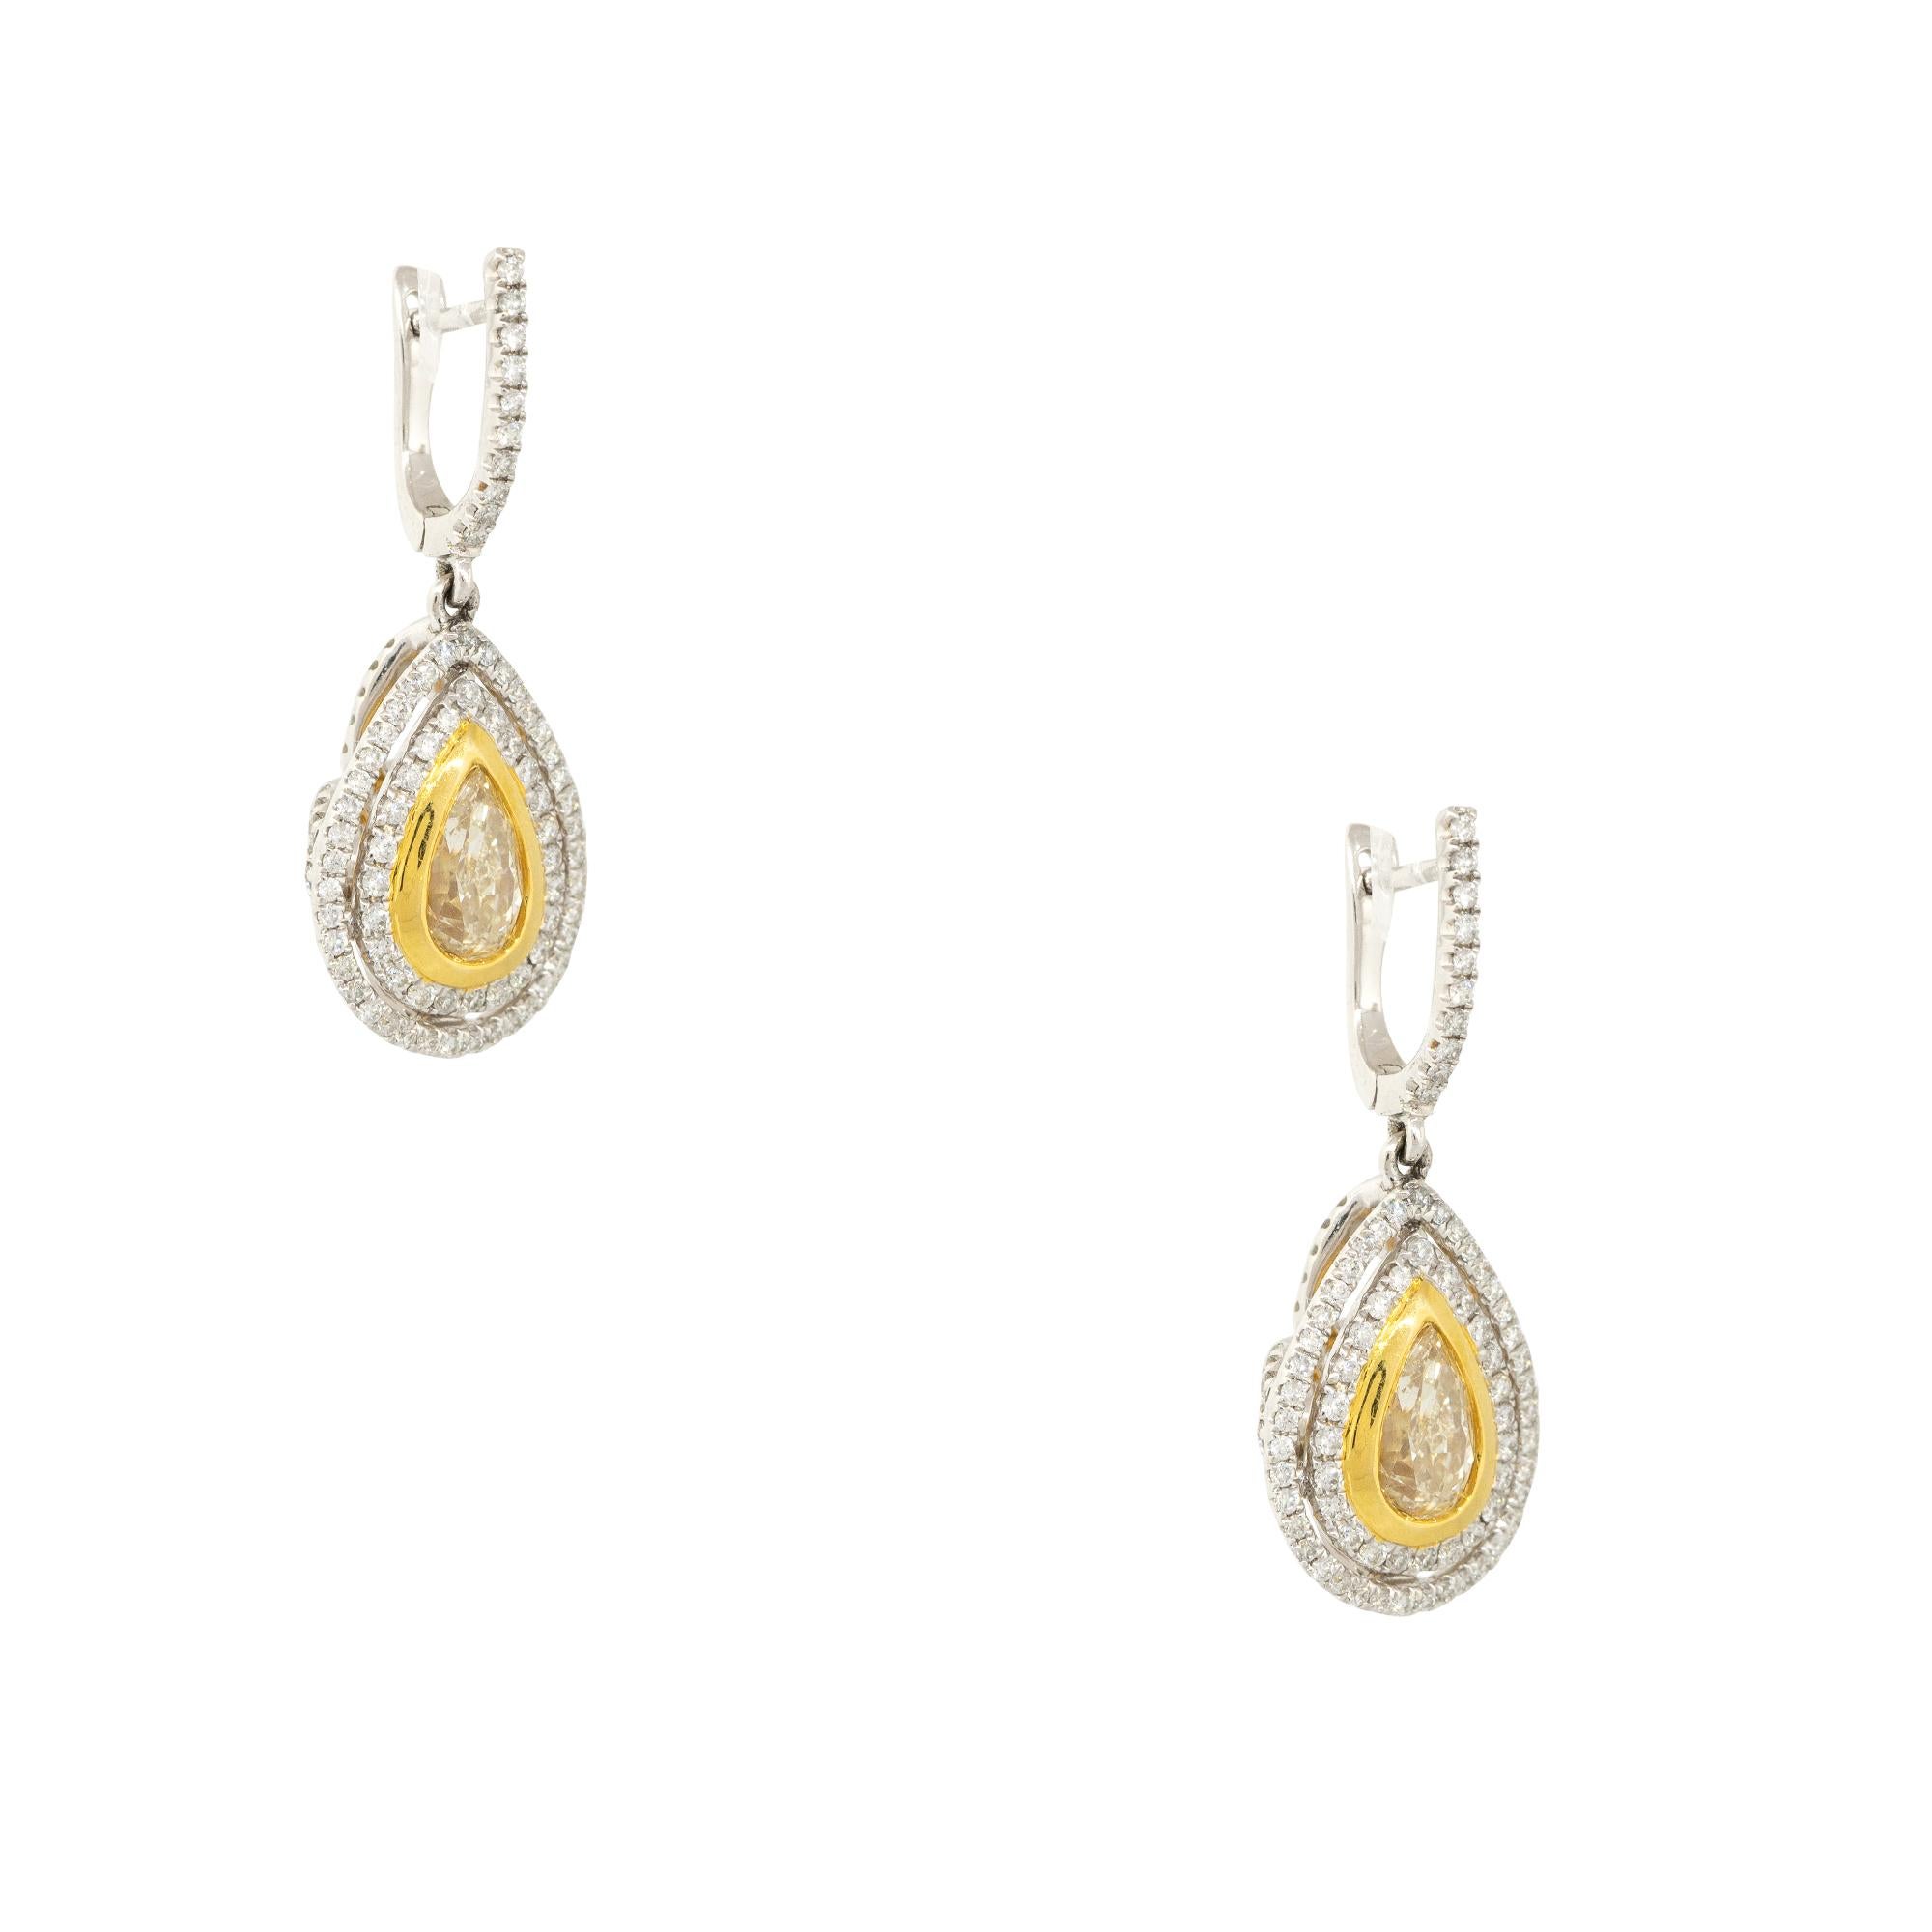 18k White and Yellow Gold 3.43ctw Pear Shaped Yellow Diamond Drop Earrings
Material: 18k White and Yellow Gold
Diamond Details: Approximately 2.23ctw of Pear shaped Yellow Diamonds. There are 2 Yellow Diamonds total and both are bezel